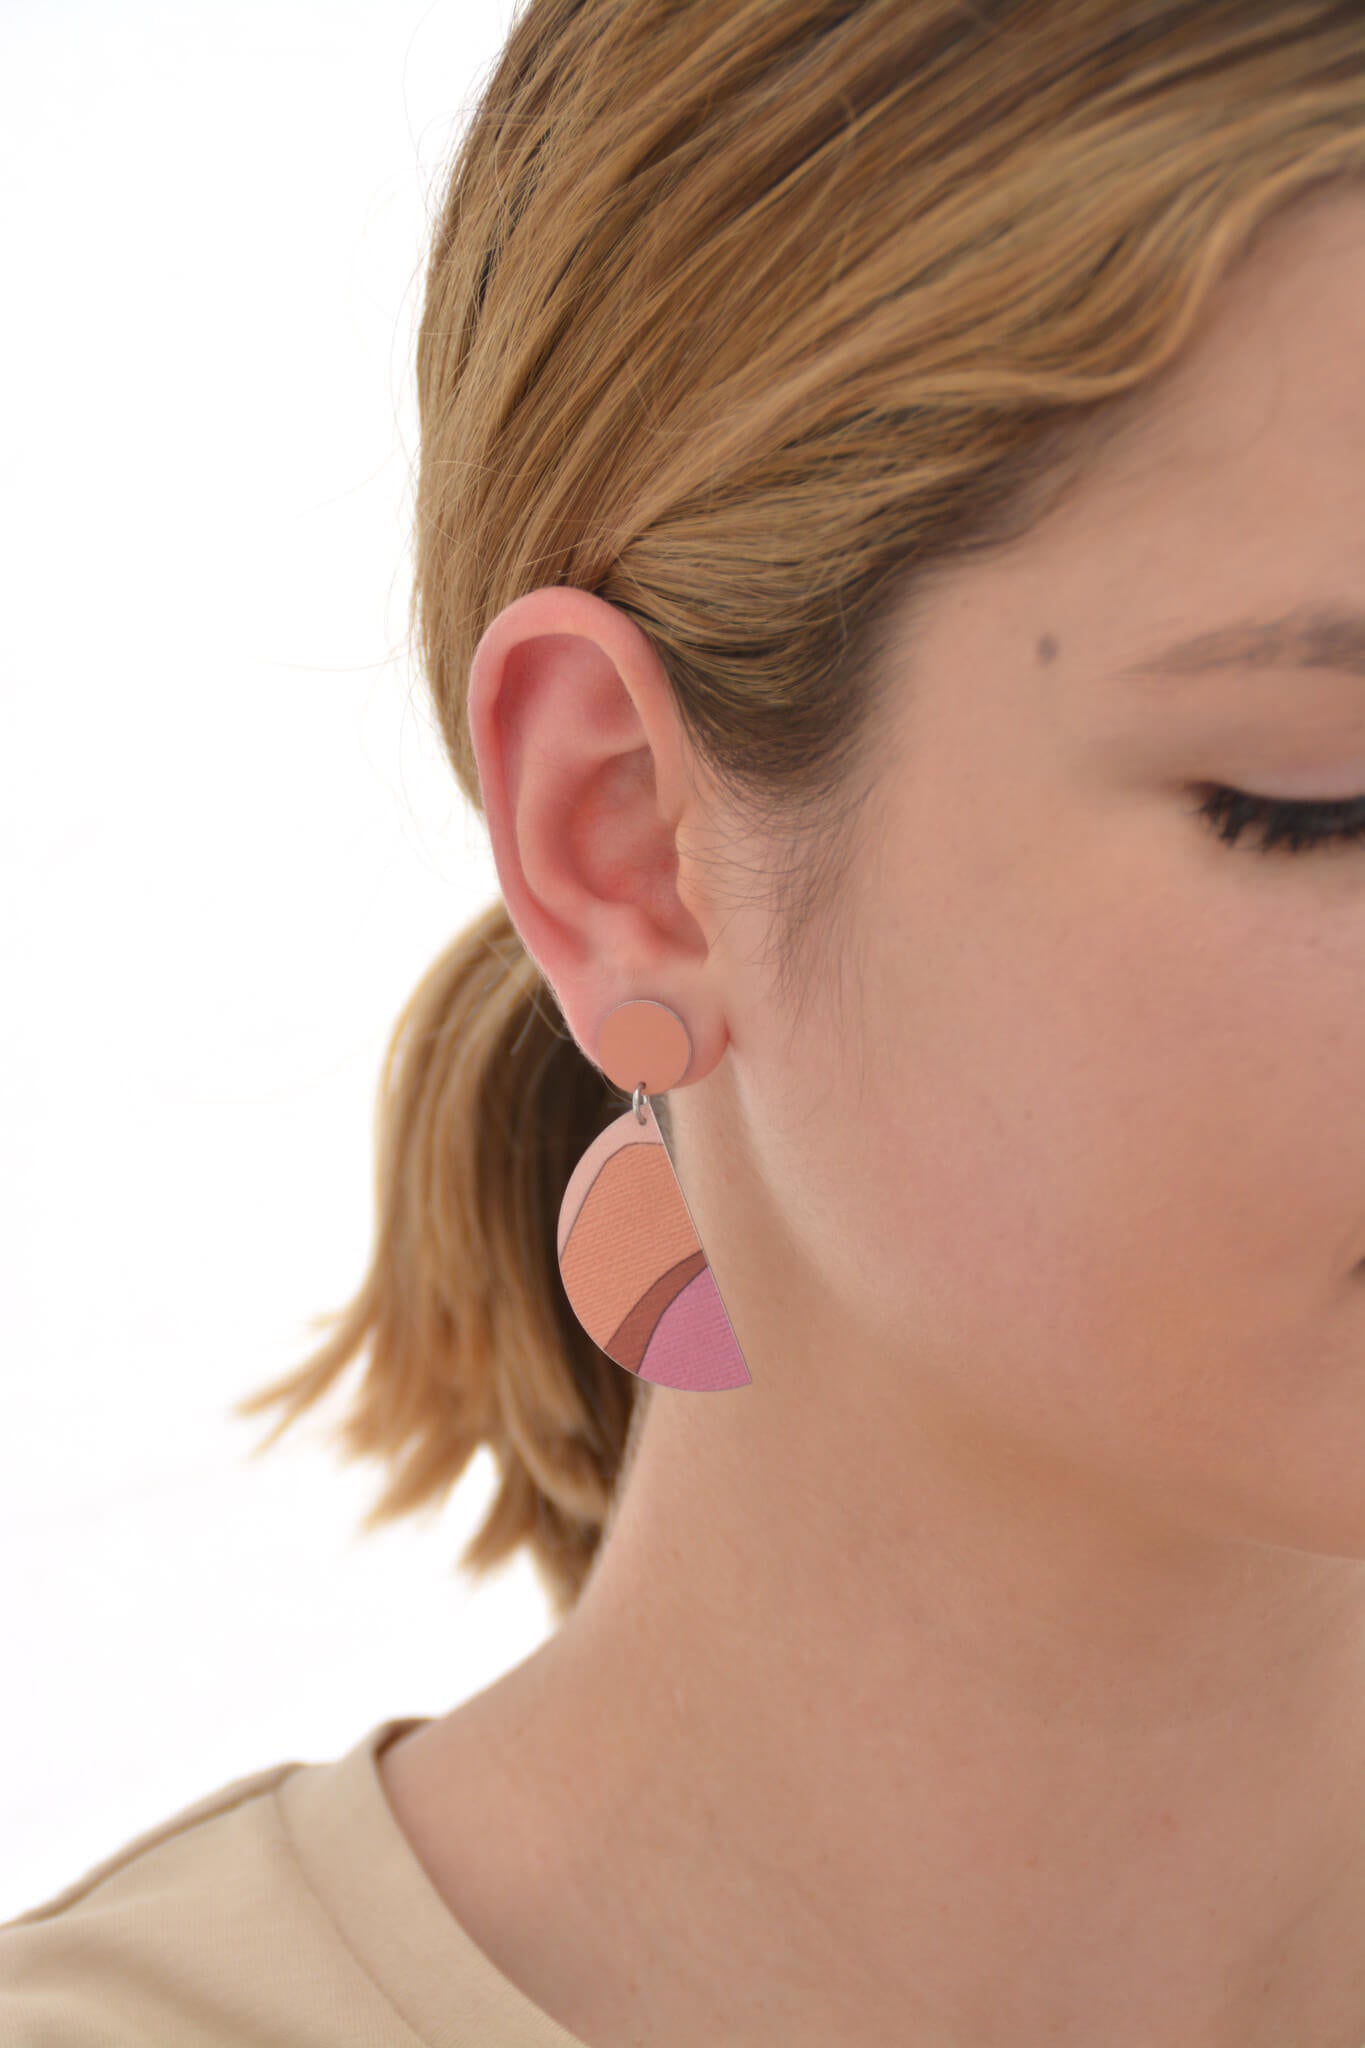 This is an image of a woman wearing a Kitty Came Home drop stud earring in her right ear. The top circle is 12 millimitres in diameter and the dangling semi circle beneath is 36 millimetres in diameter. The design is called the golden dawn by Satin and Tat. Burgundy, orange and terracotta shapes form a landscape of gently rolling hills beneath an orange-pink sky.